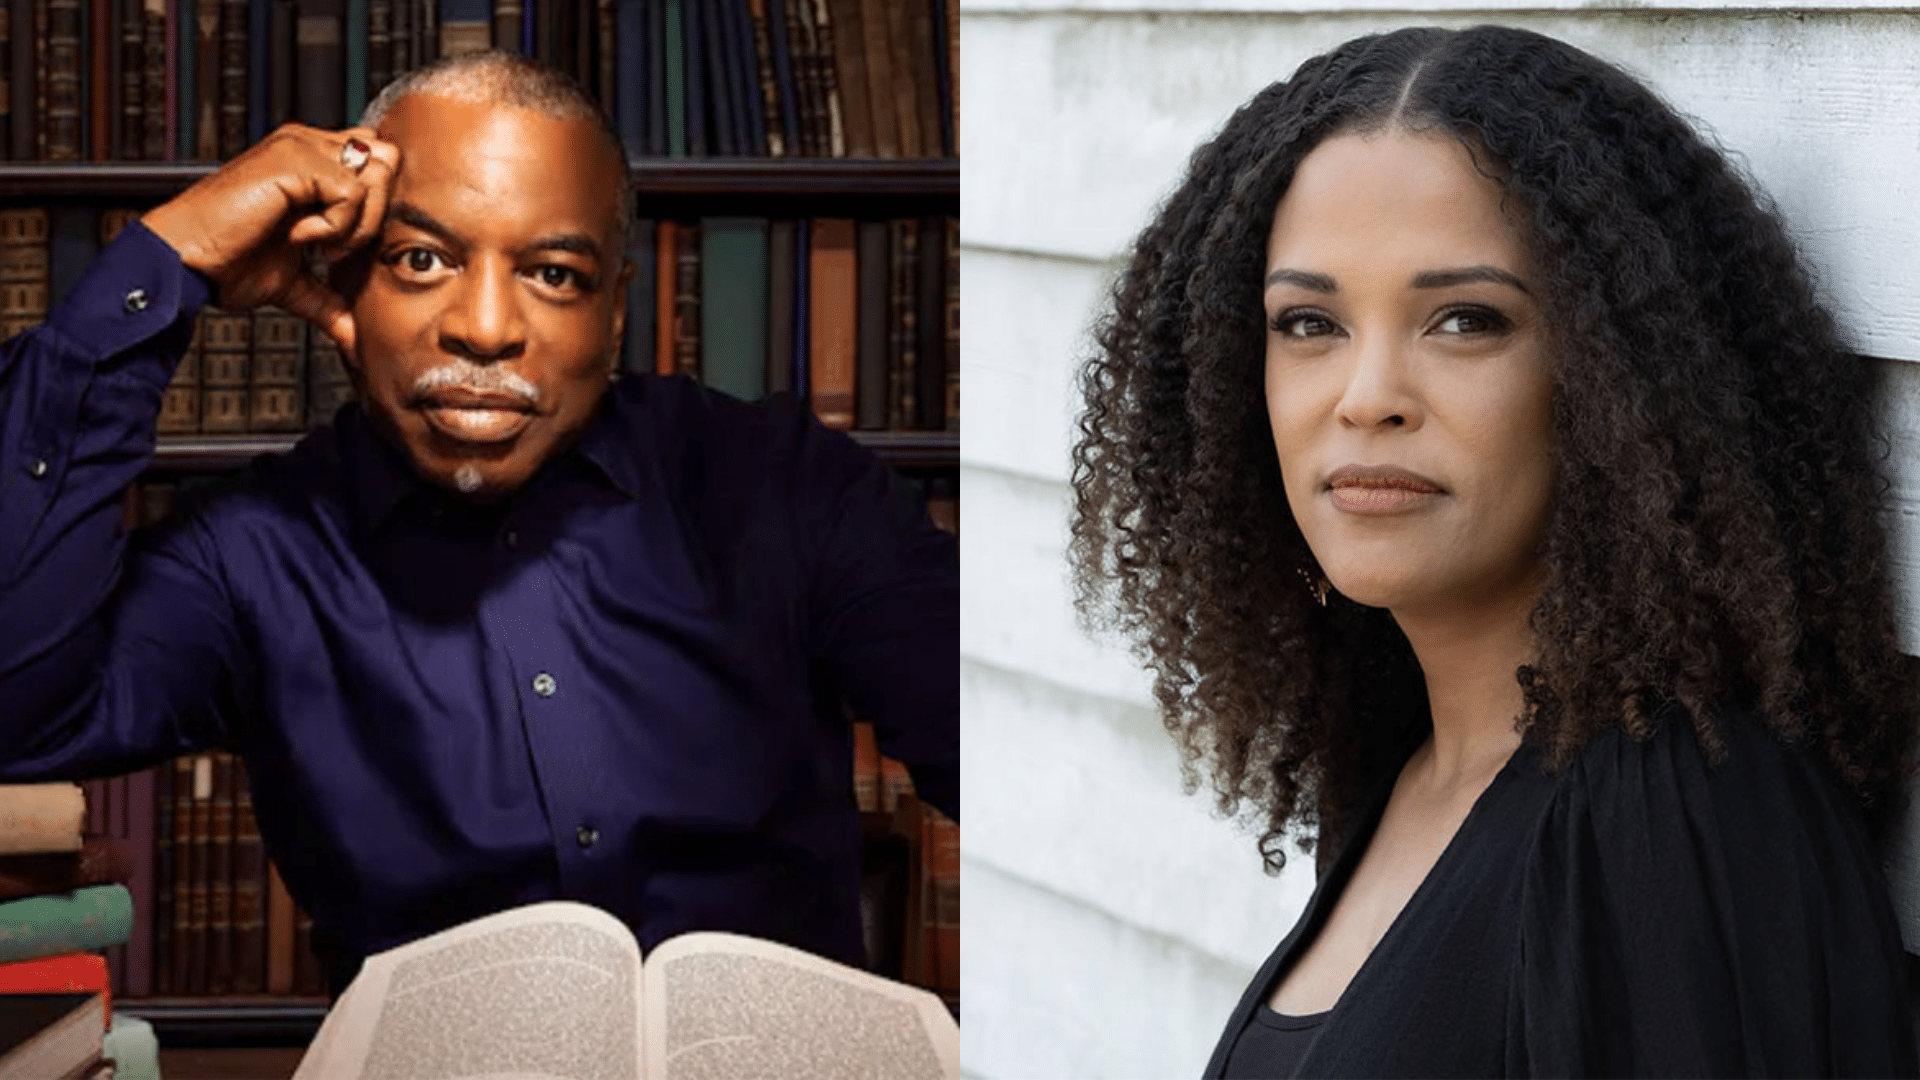 LeVar Burton and Jesmyn Ward to appear as panelists at the Mississippi Book Festival